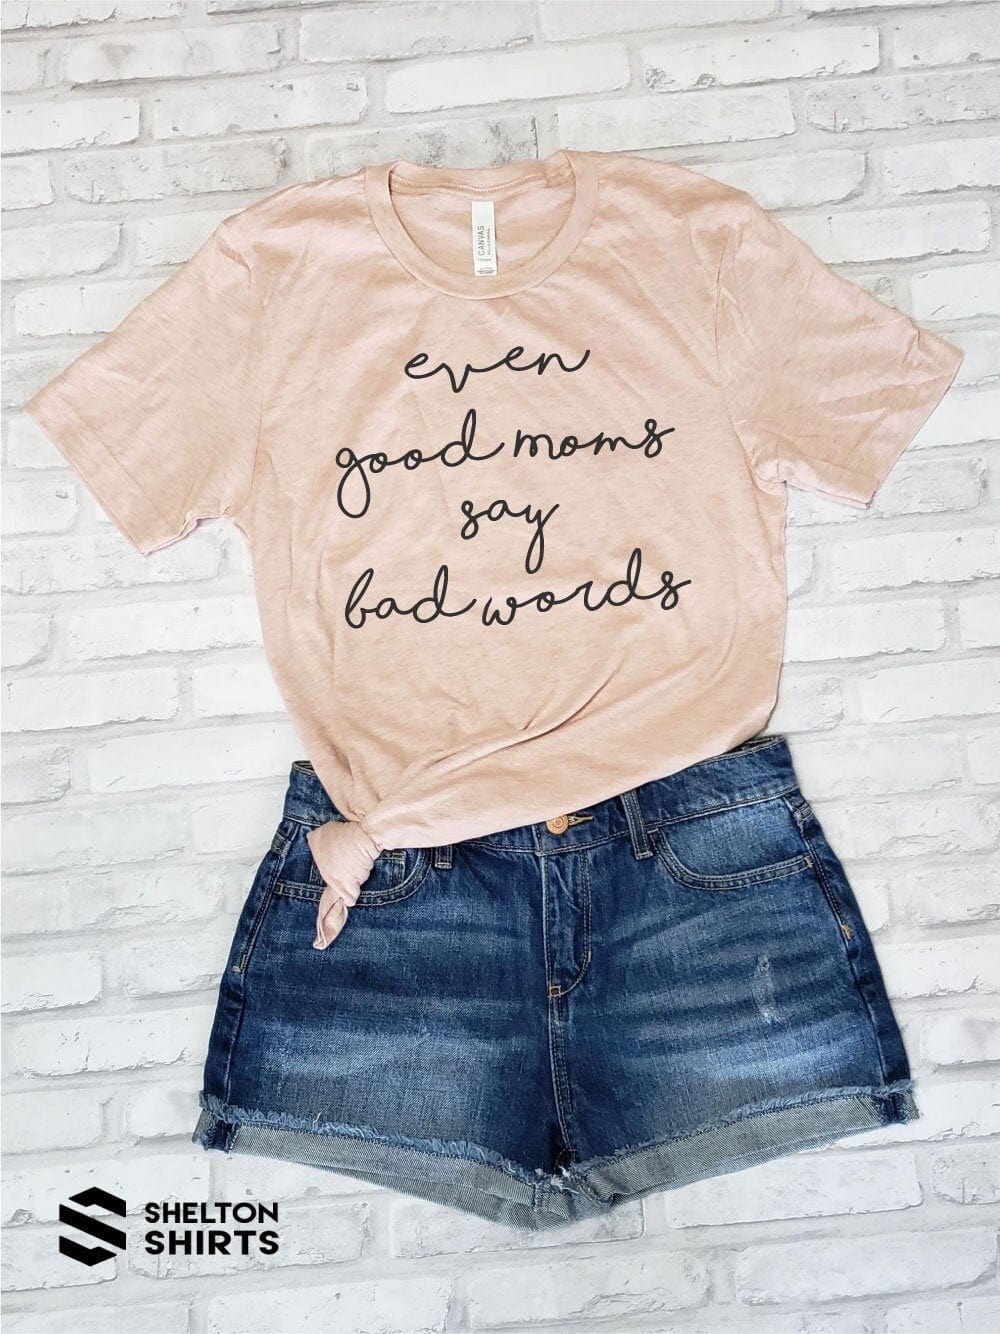 Even Good Moms Say Bad Words Super Soft Cotton Comfy T-Shirt Candy Wrapper Store